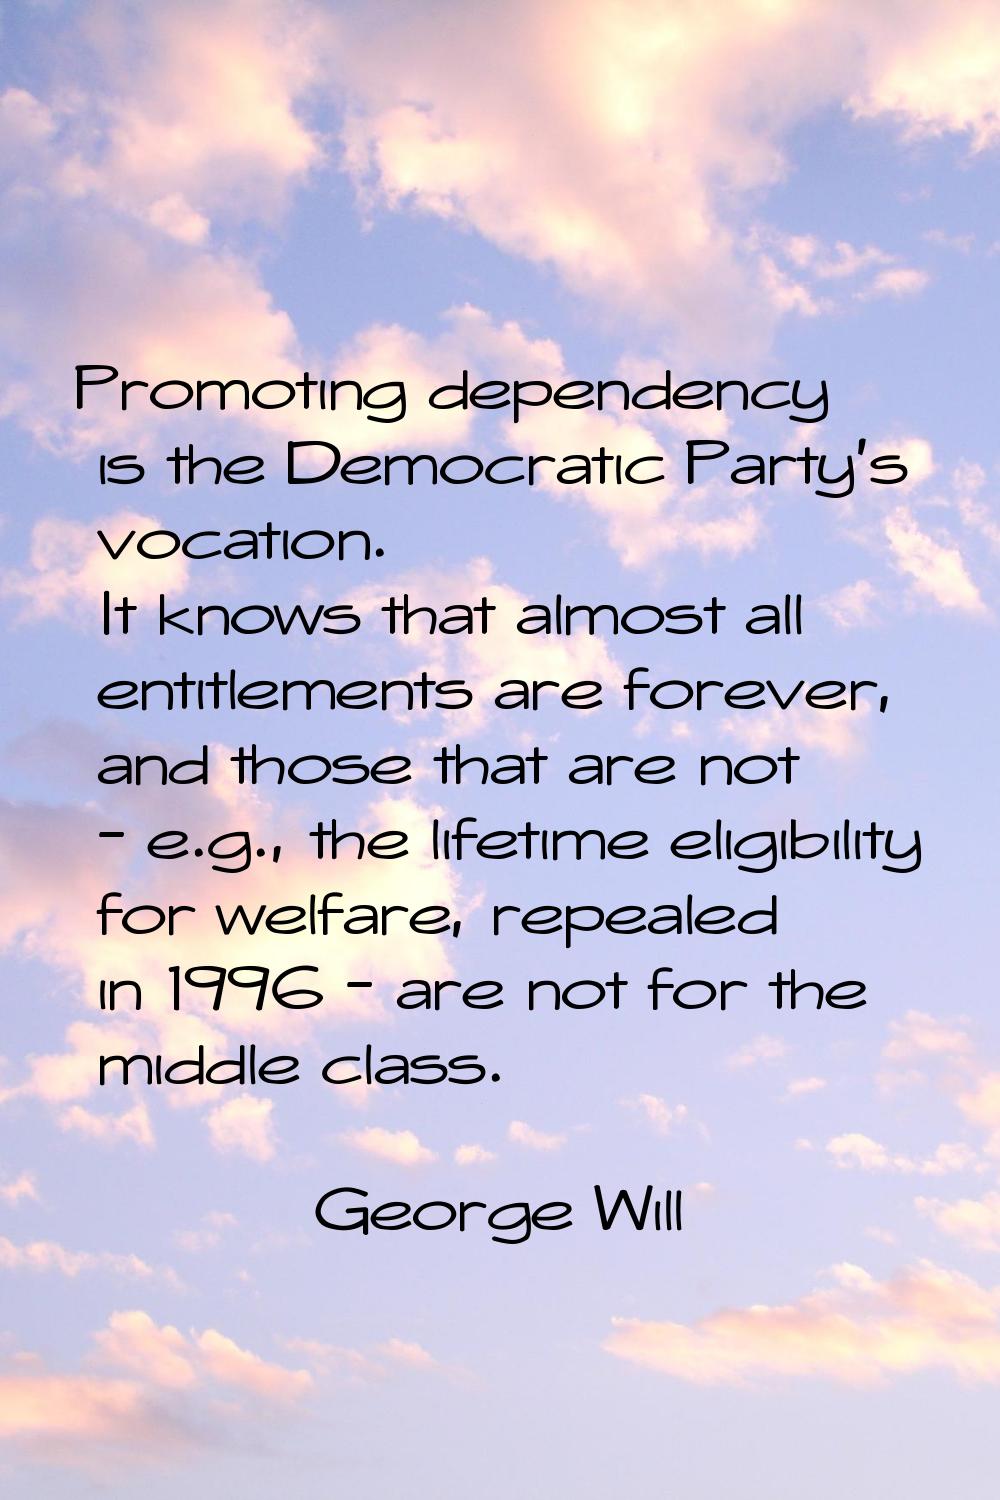 Promoting dependency is the Democratic Party's vocation. It knows that almost all entitlements are 